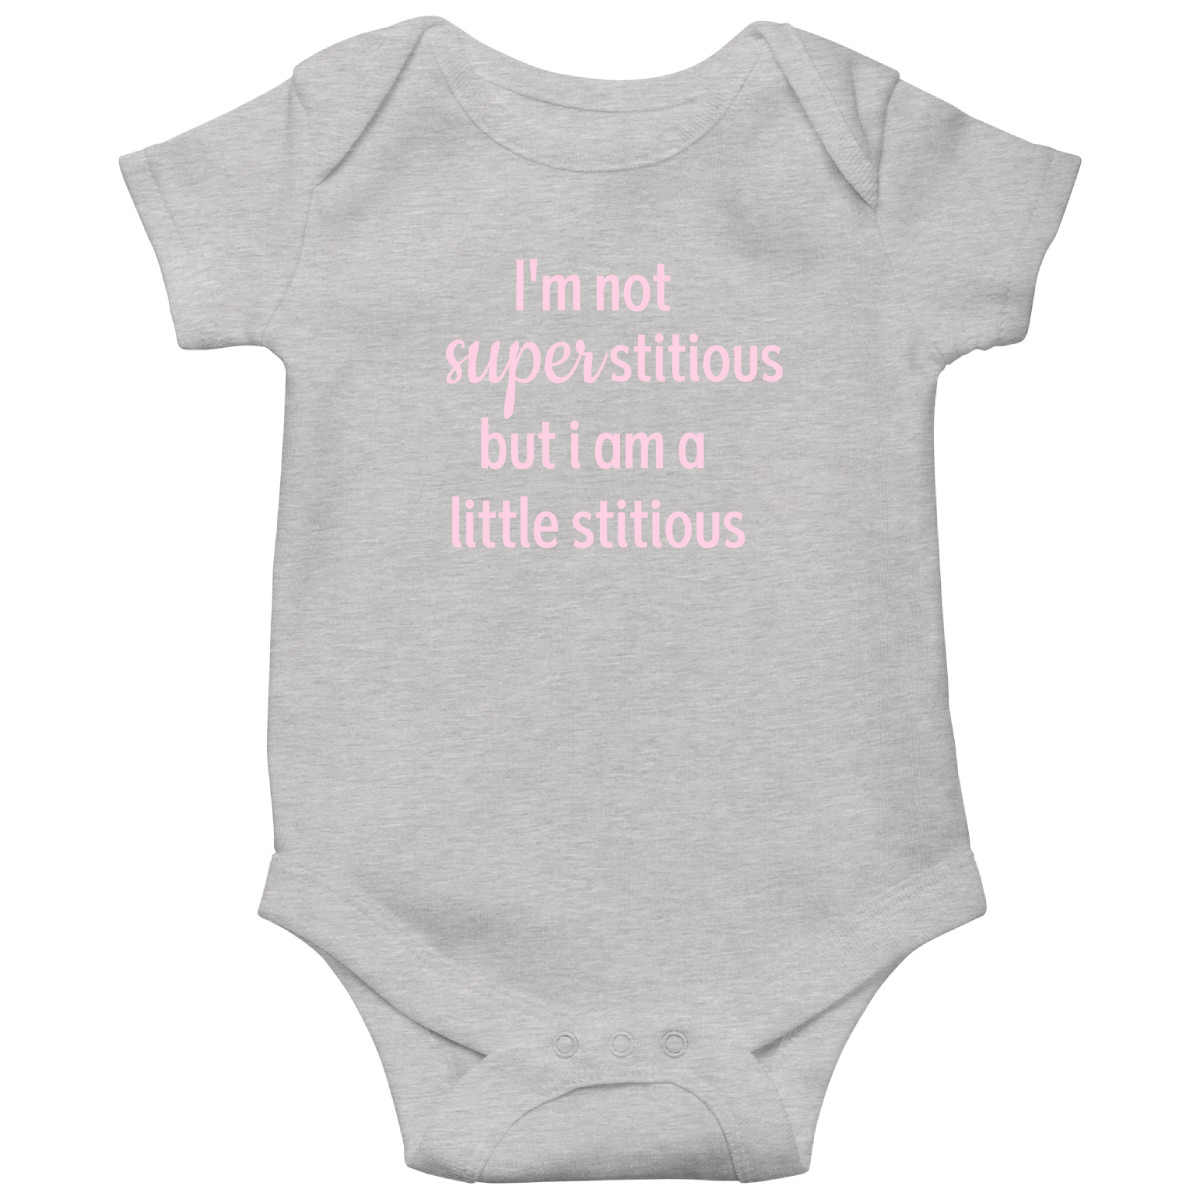 I'm Not Superstitious but I am a Little Stitious Baby Bodysuits | Gray